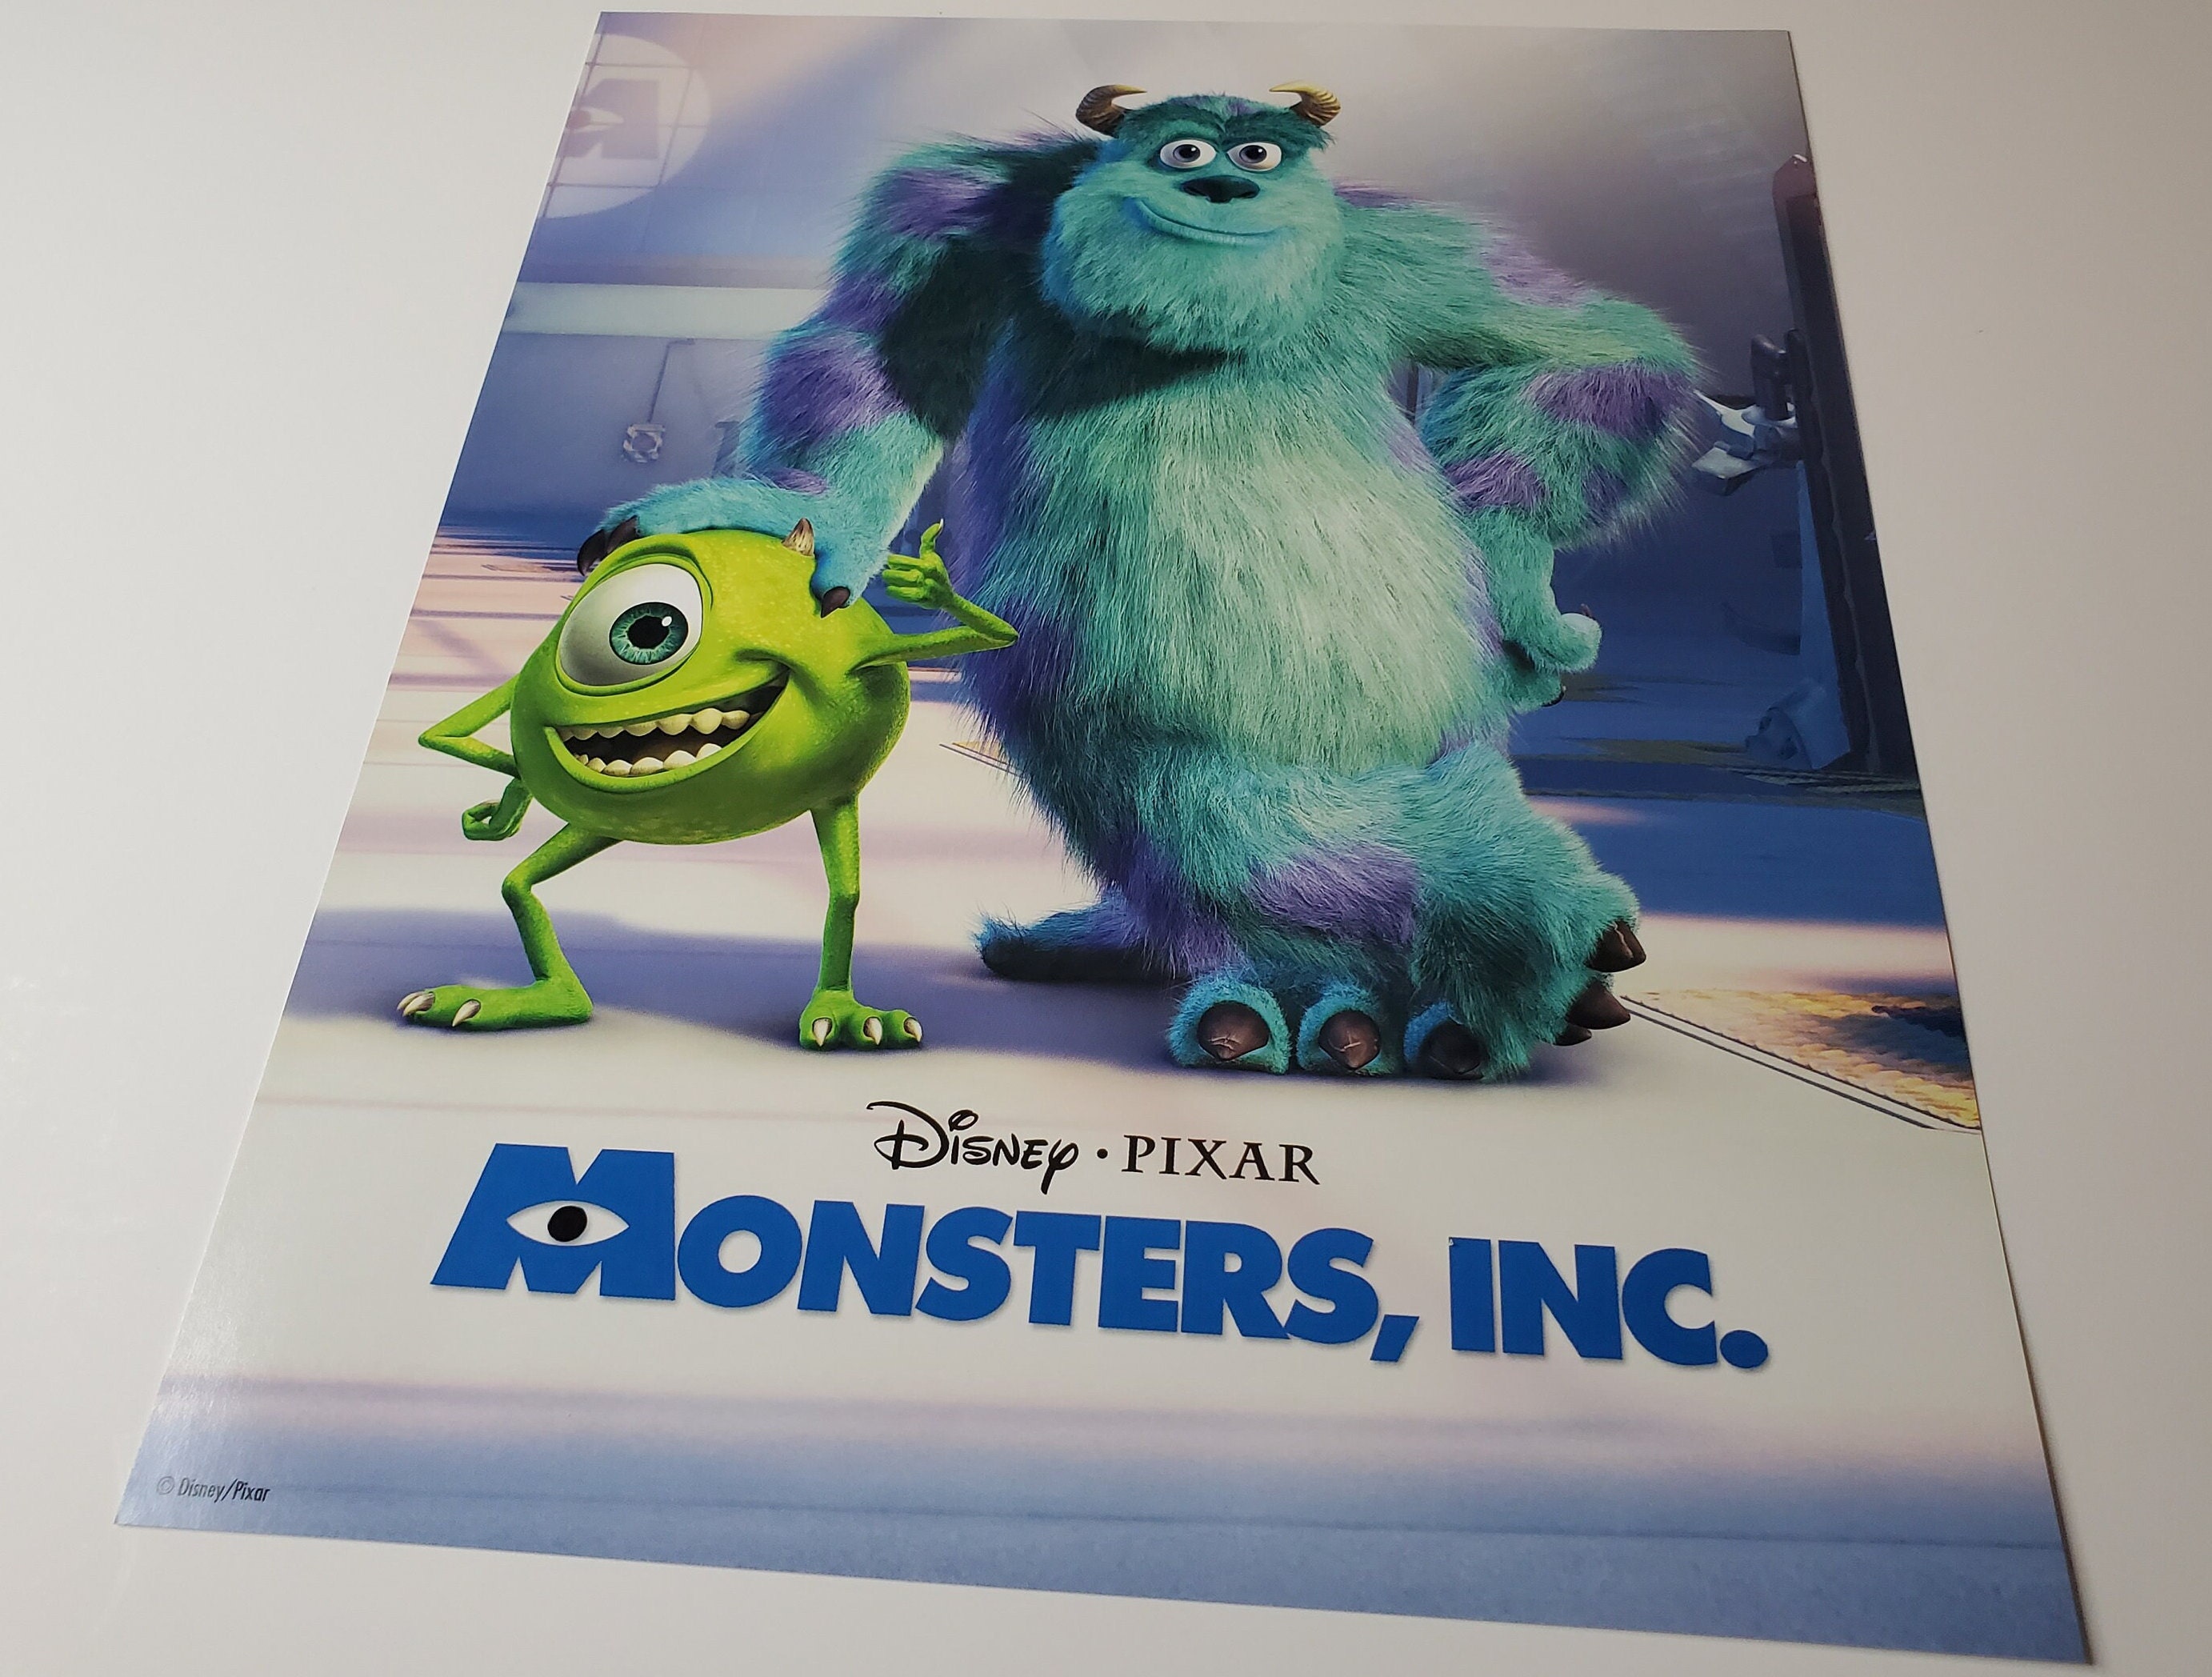 Monstropolis Transit Authority Taxi - Monsters, Inc. Mike & Sulley